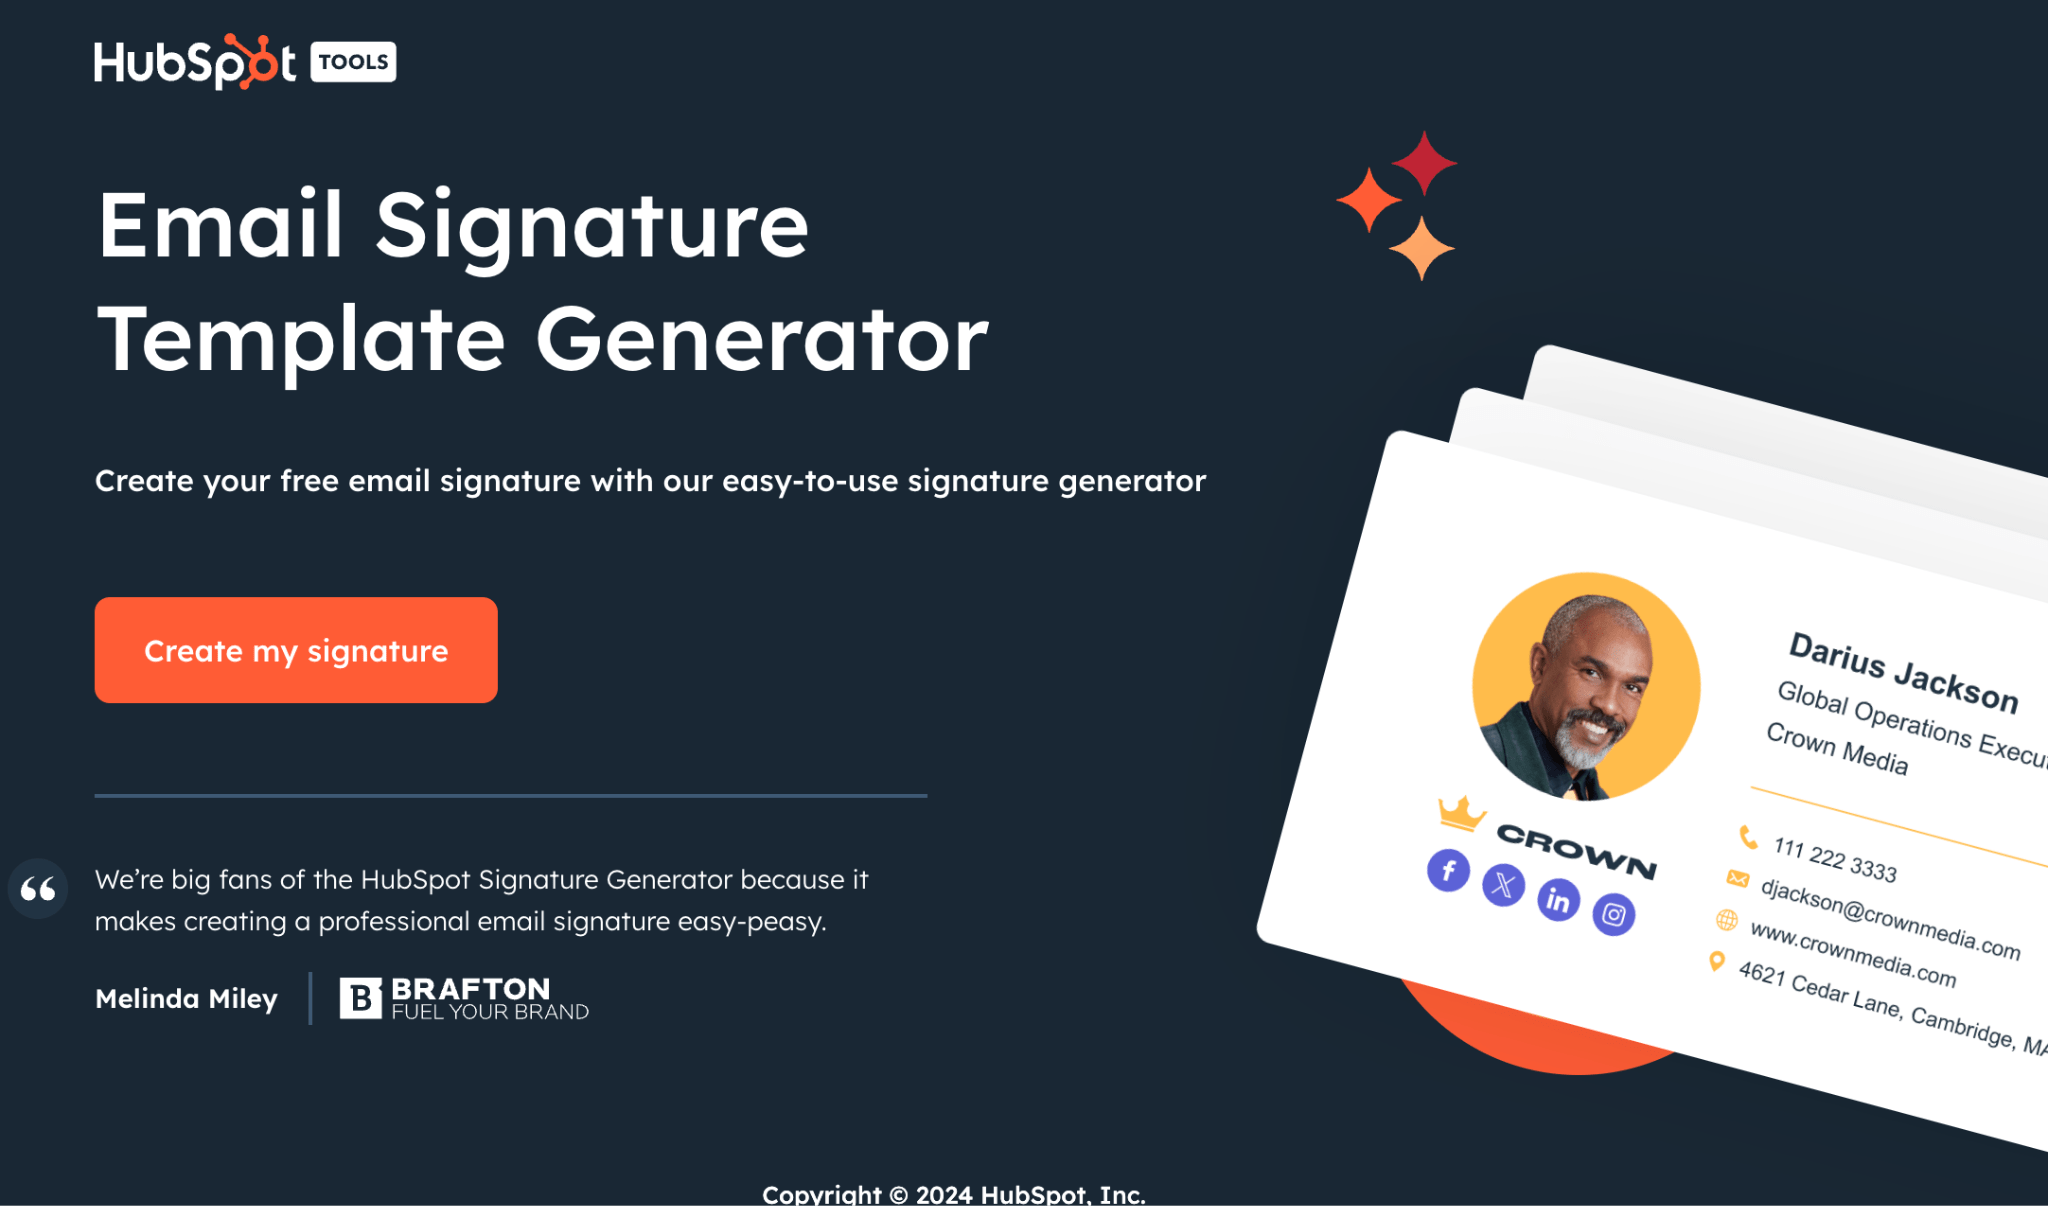 Landing page for one of the free tools. 